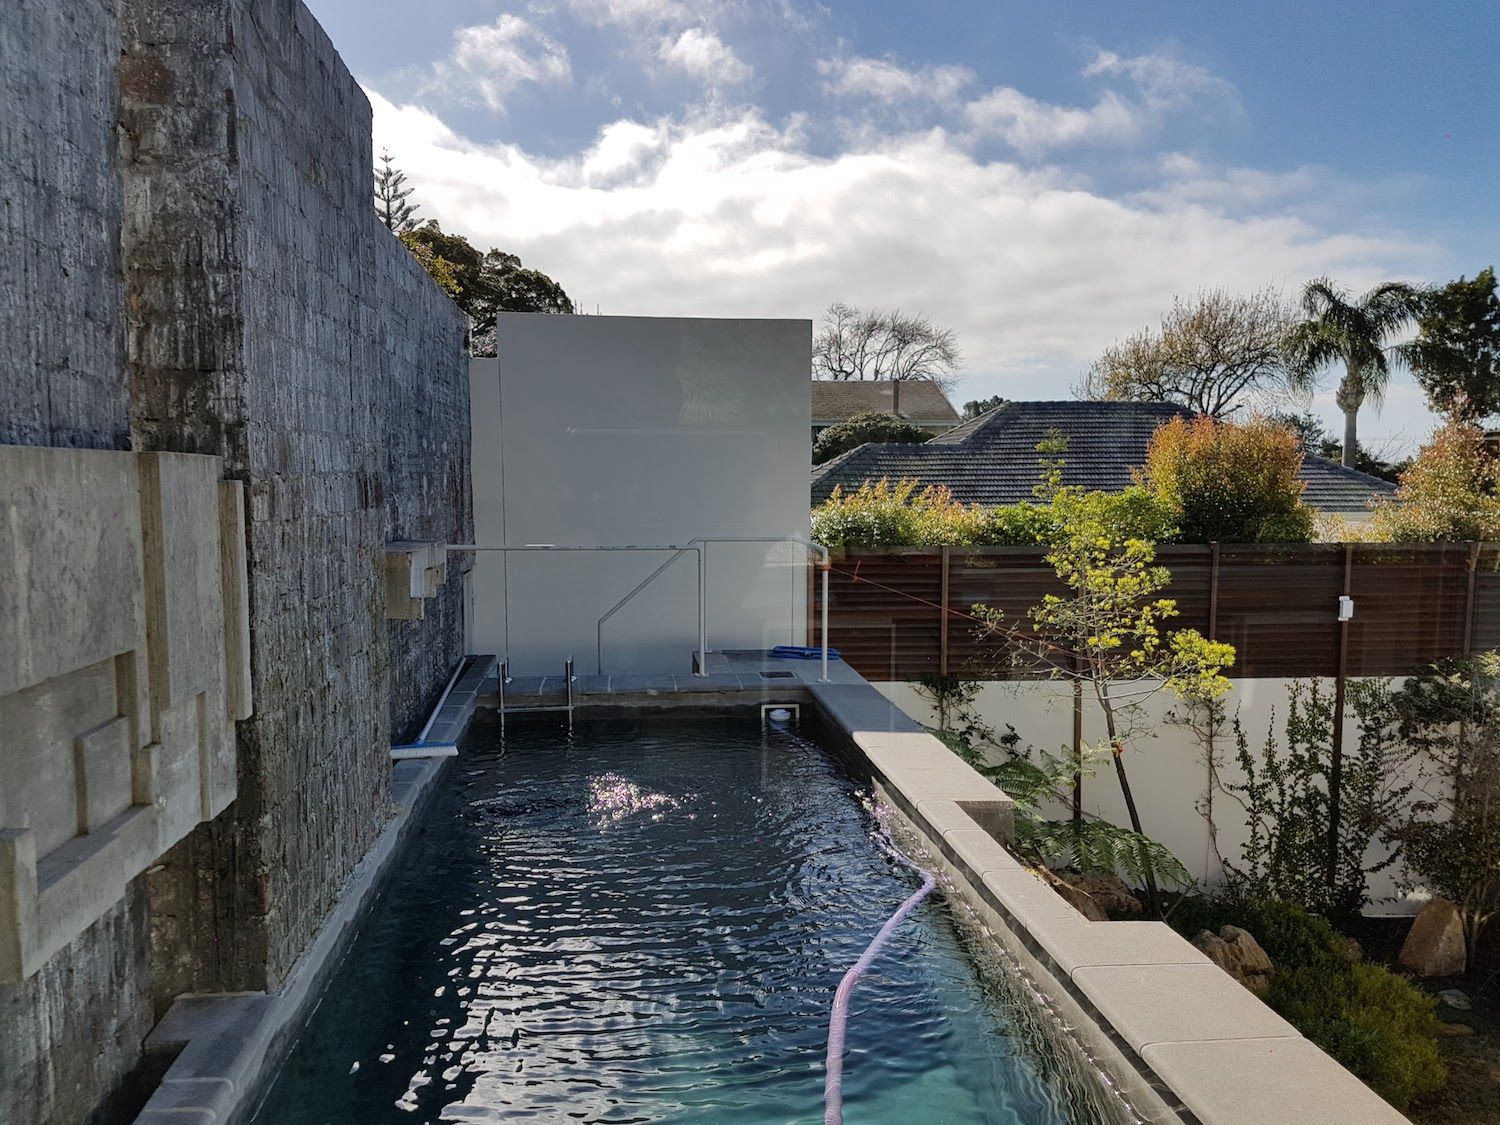 Photo 23 of Newlands Luxury Villa accommodation in Newlands, Cape Town with 4 bedrooms and 4 bathrooms